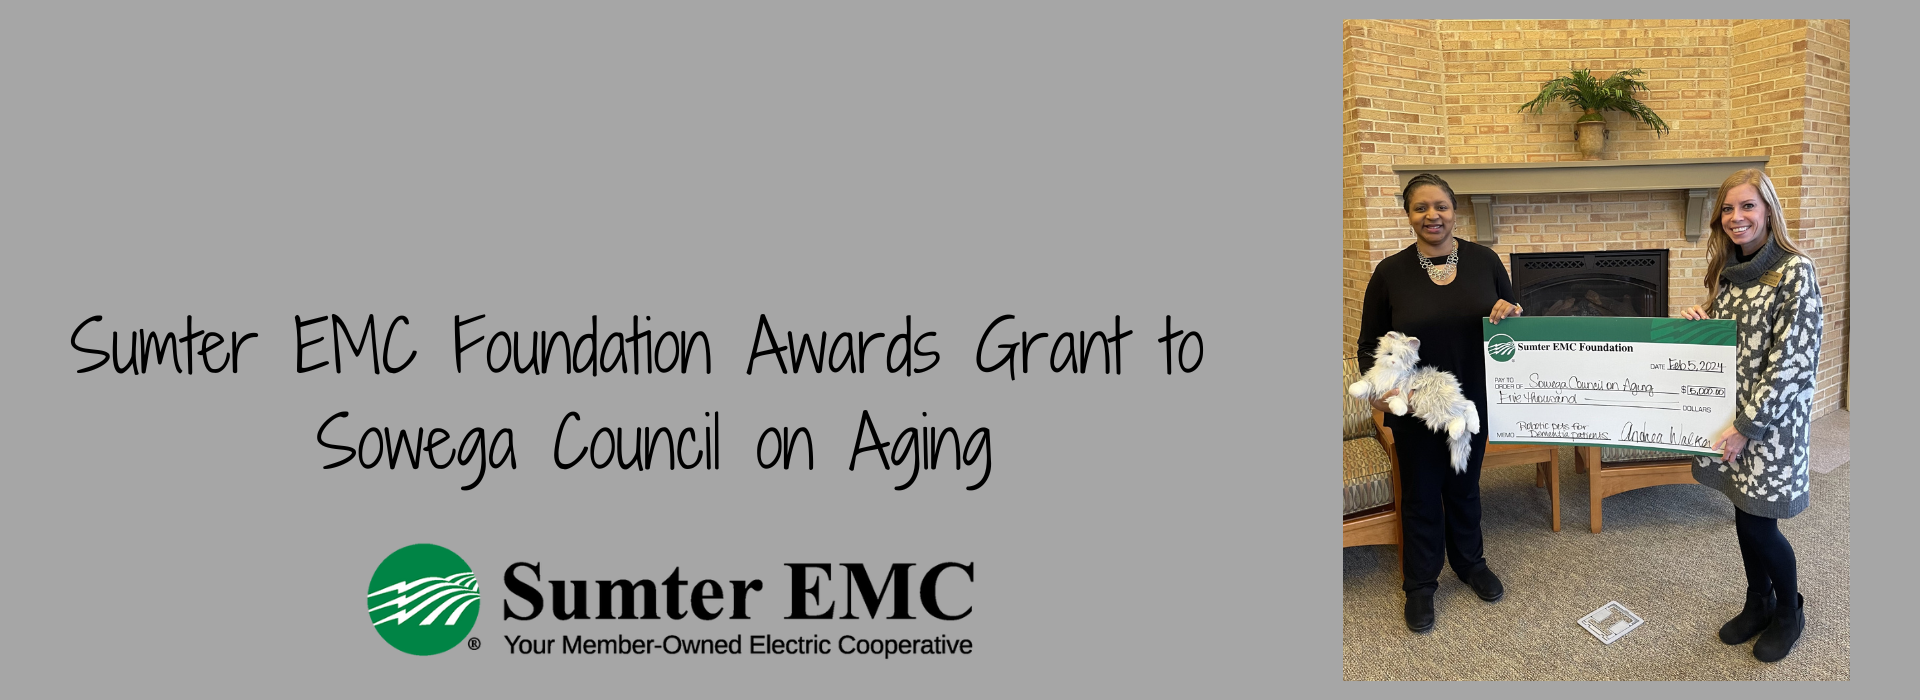 Sumter EMC Foundation Awards Grant to Sowega Council on Aging 